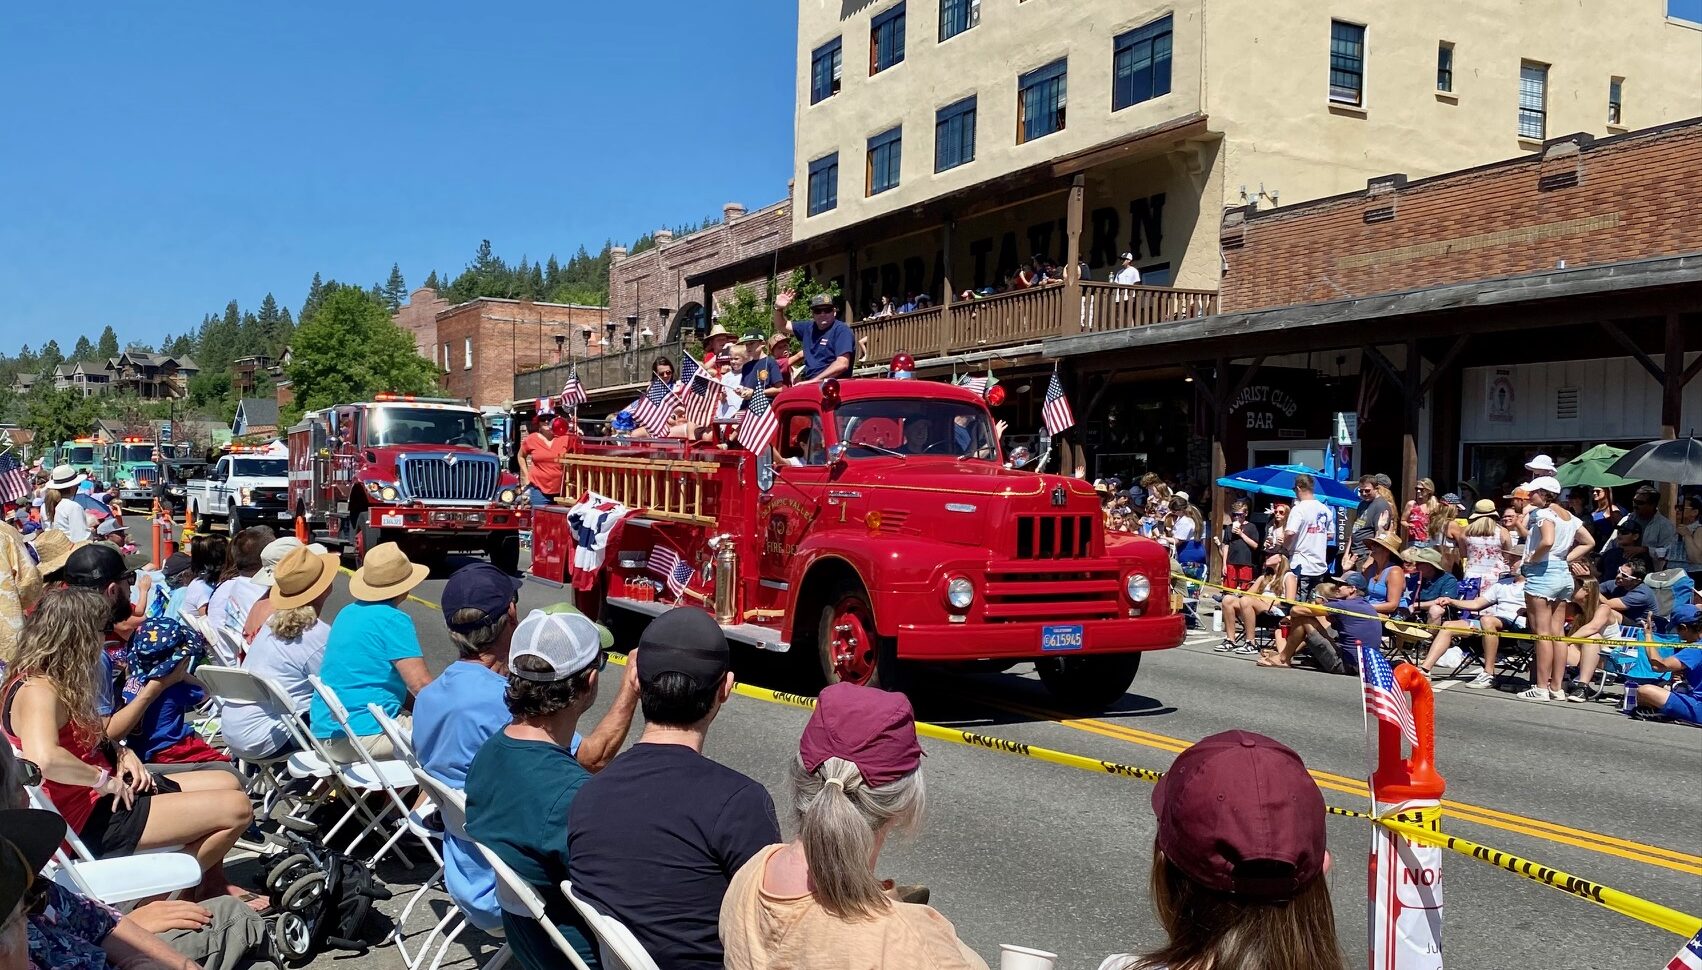 Truckee's 4th of July Parade: There Really Is No Place Like Home